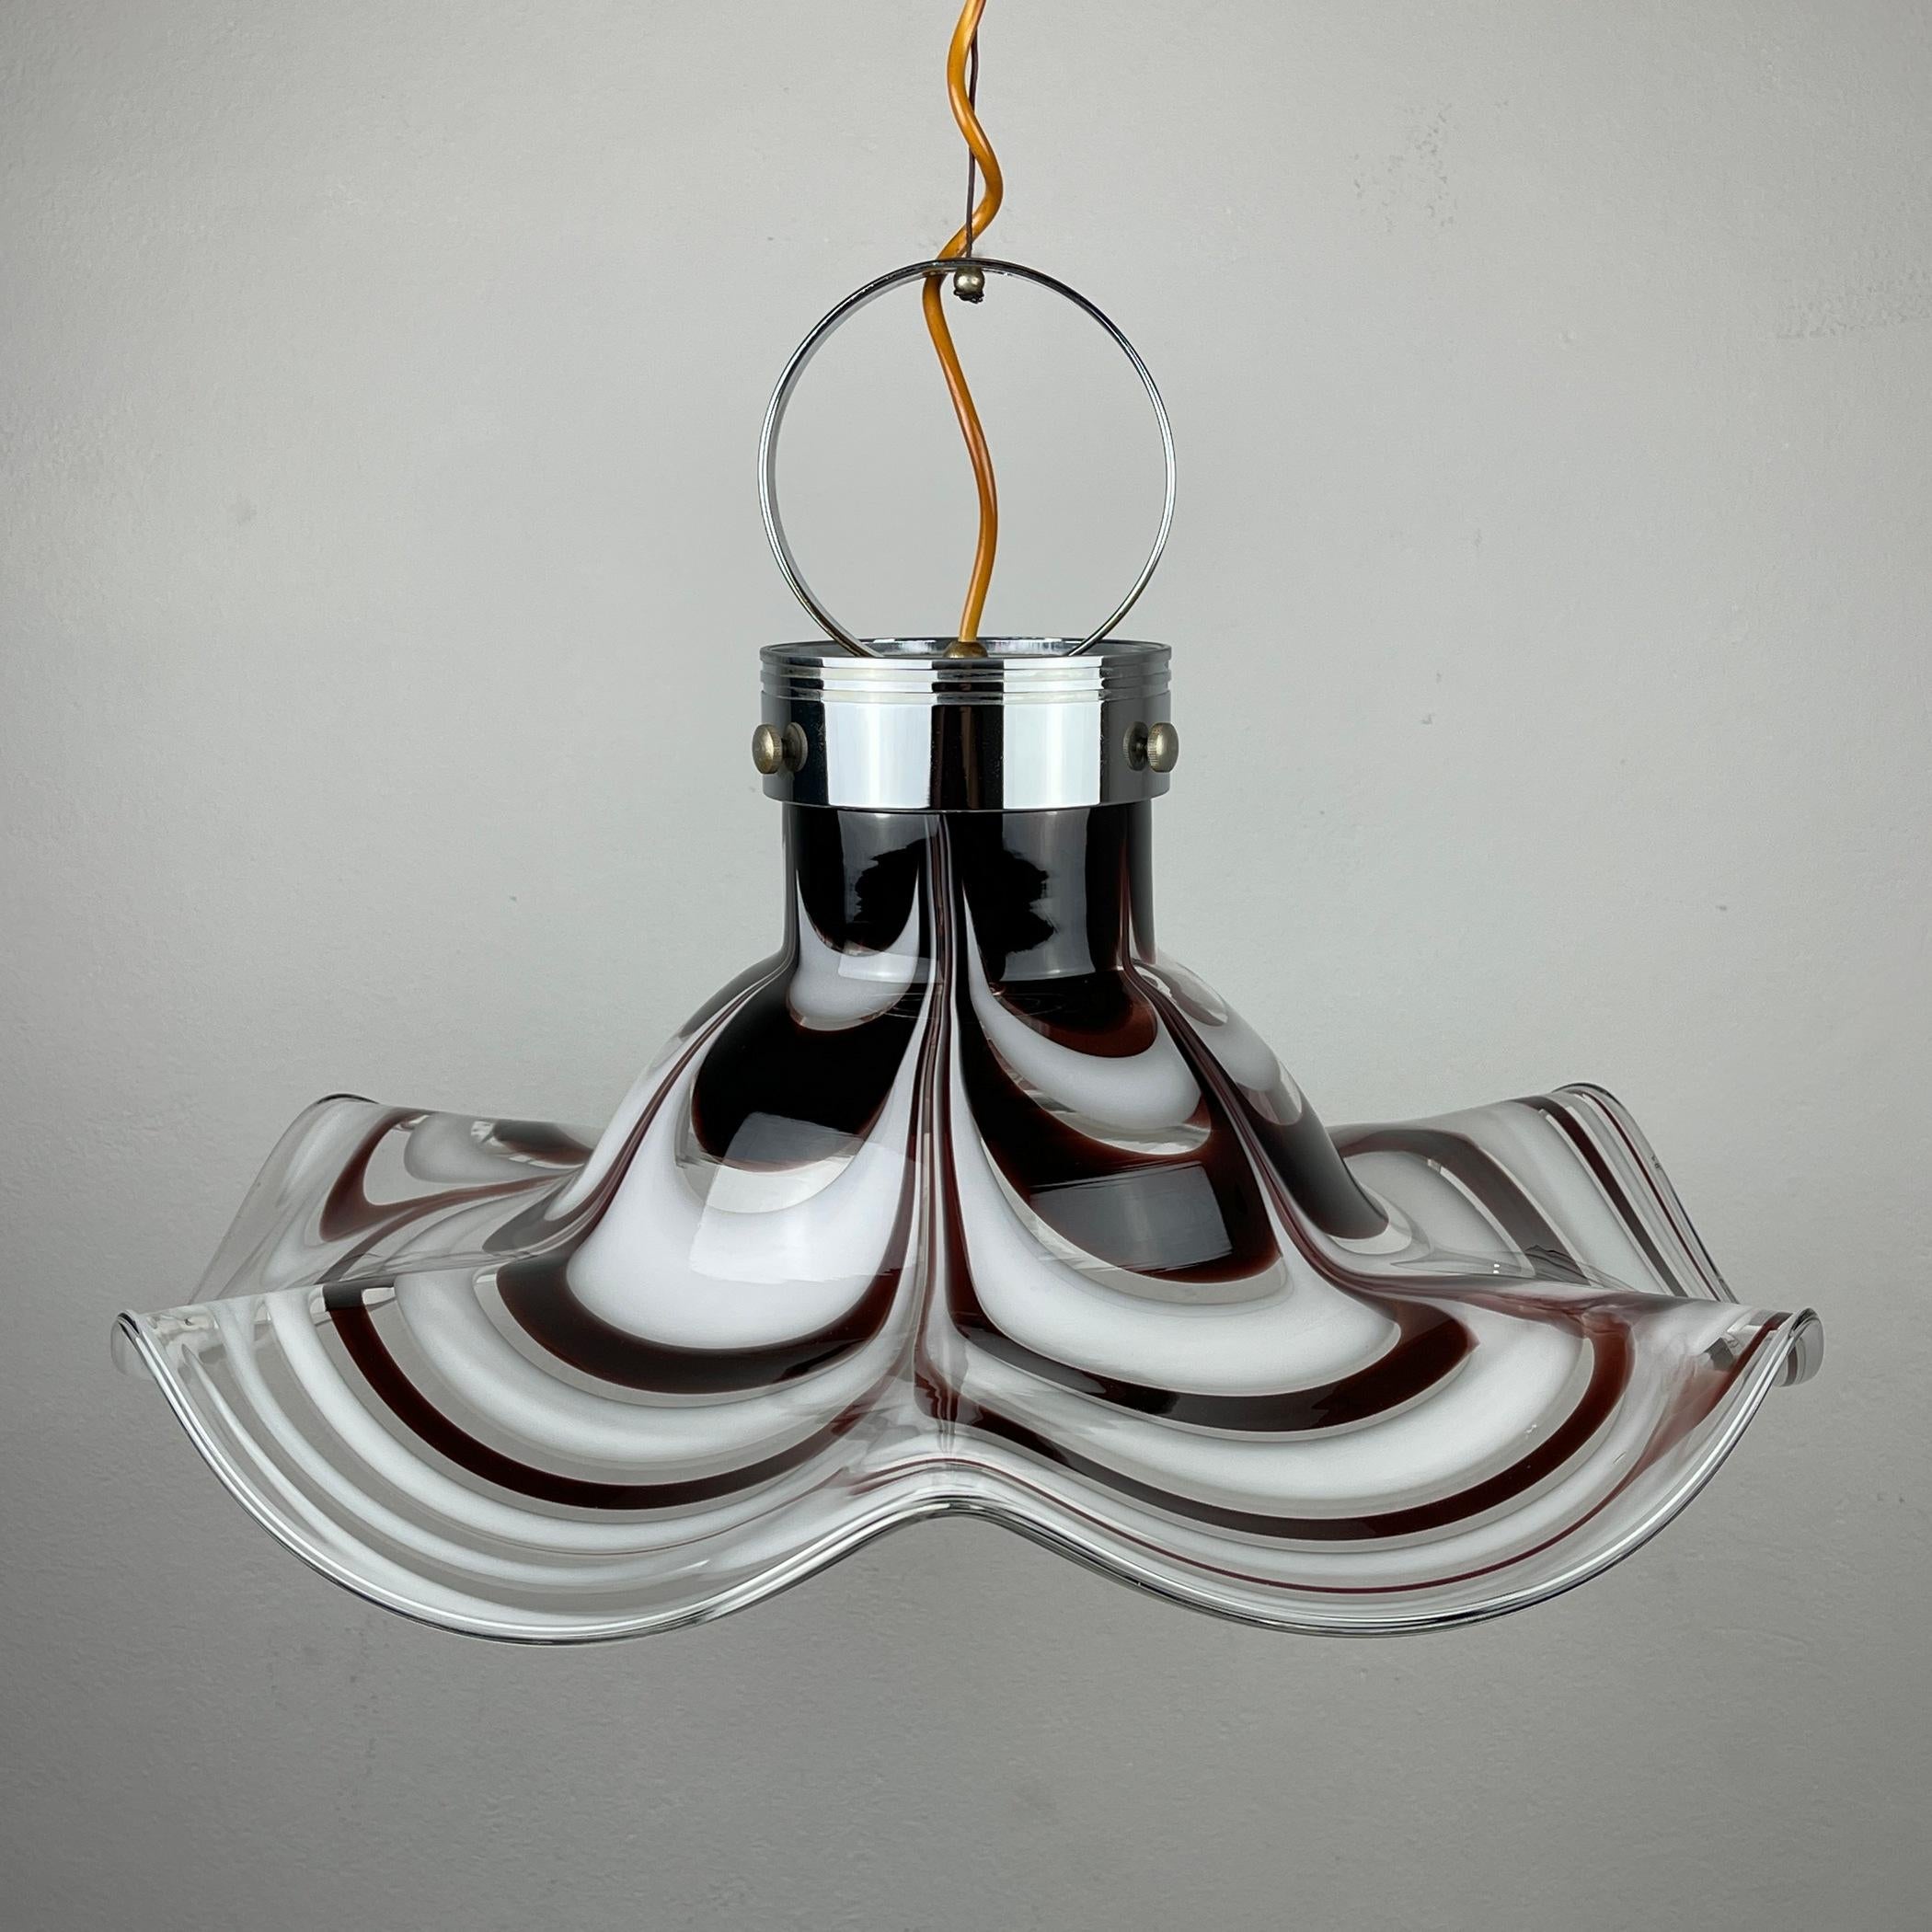 Original impressive Murano pendant lamp, produced by AV Mazzega in Italy, in the 1970s. The shade is molded by hand. The lamp also displays some true Murano craftsmanship. AB Mazzega was founded by Angelo Vittorio Mazzega in 1946 in Italy on the